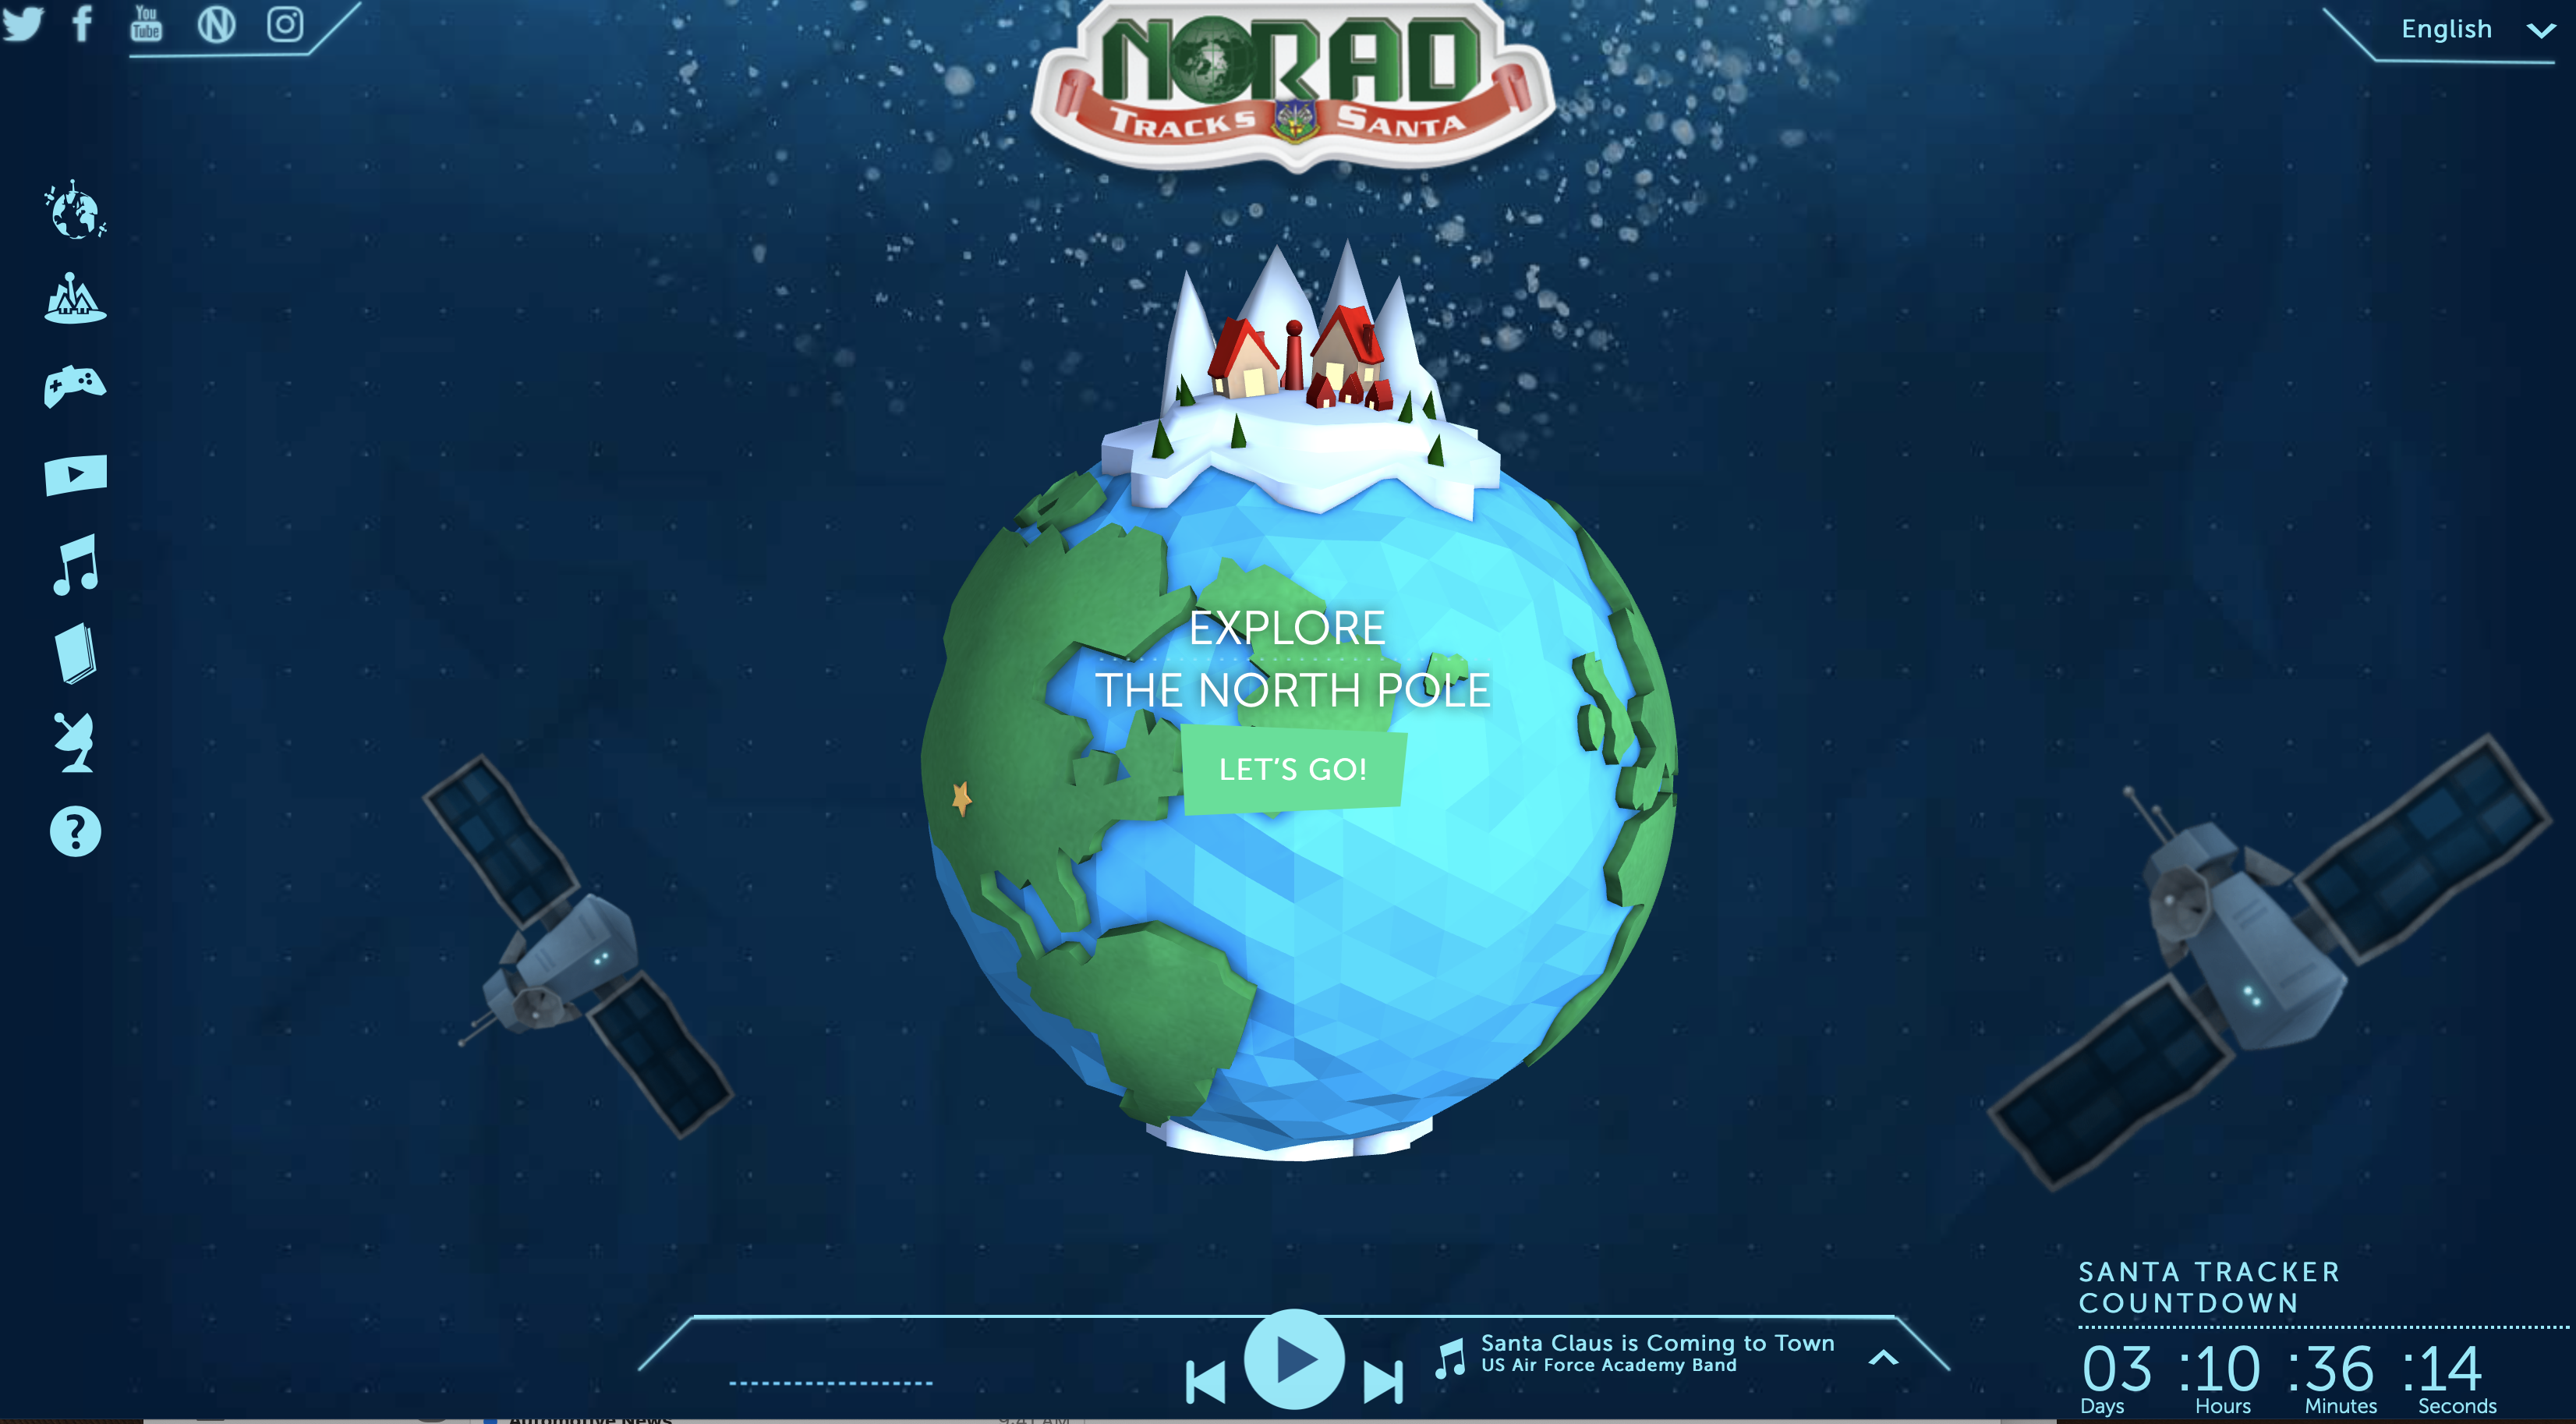 Once again, GPS to Help NORAD Track Santa Claus’ Journey